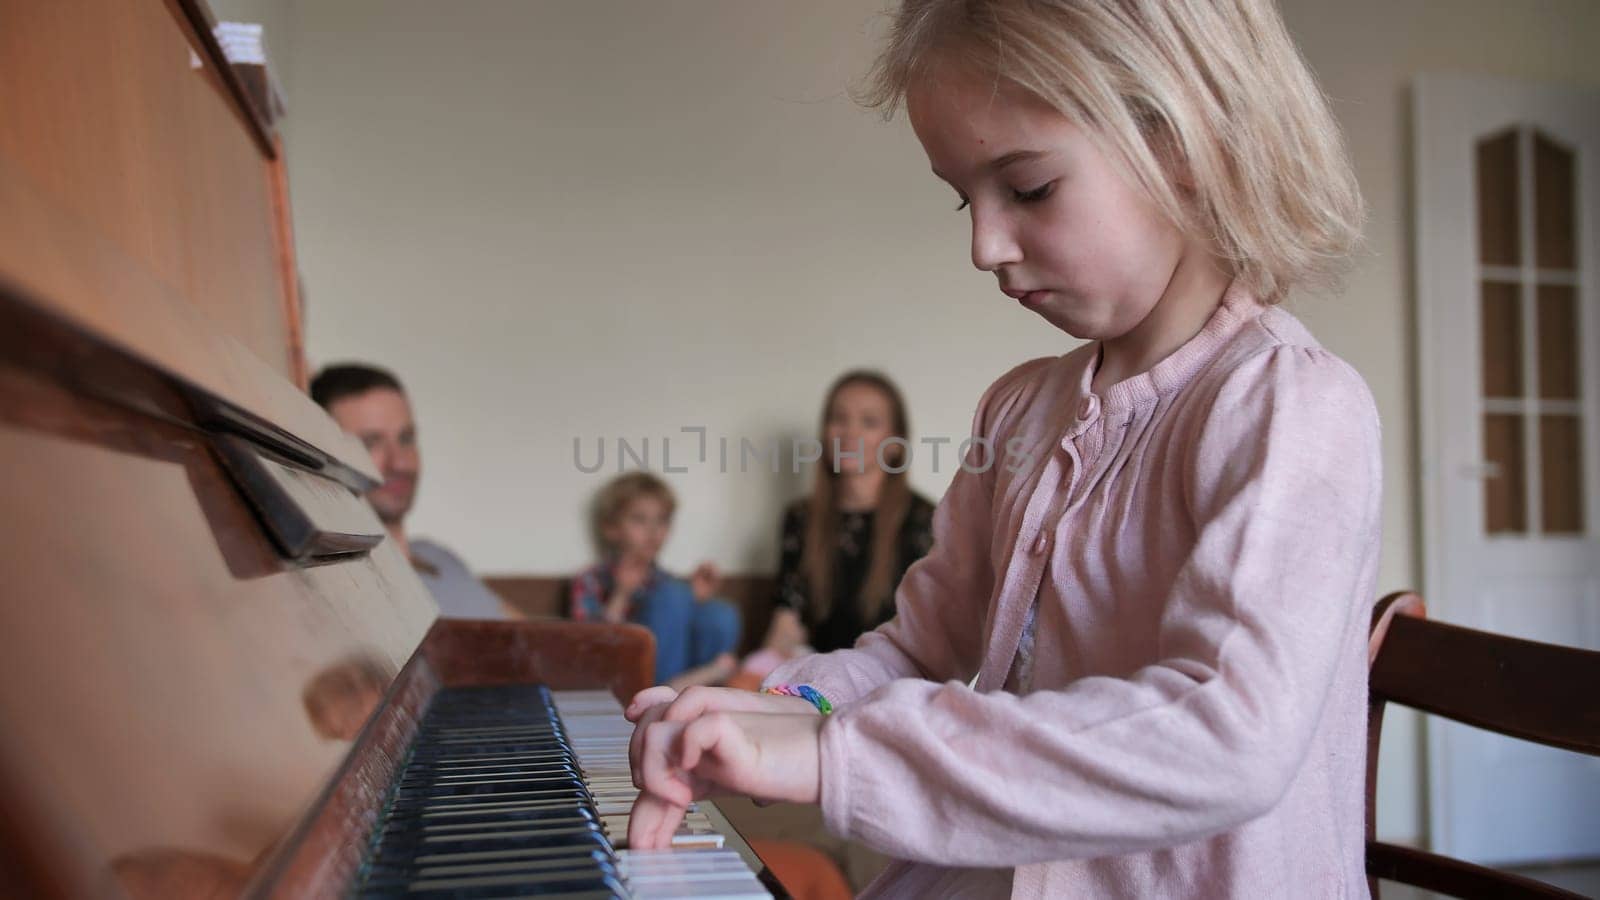 A six-year-old girl plays the piano with her family and her parents applaud her